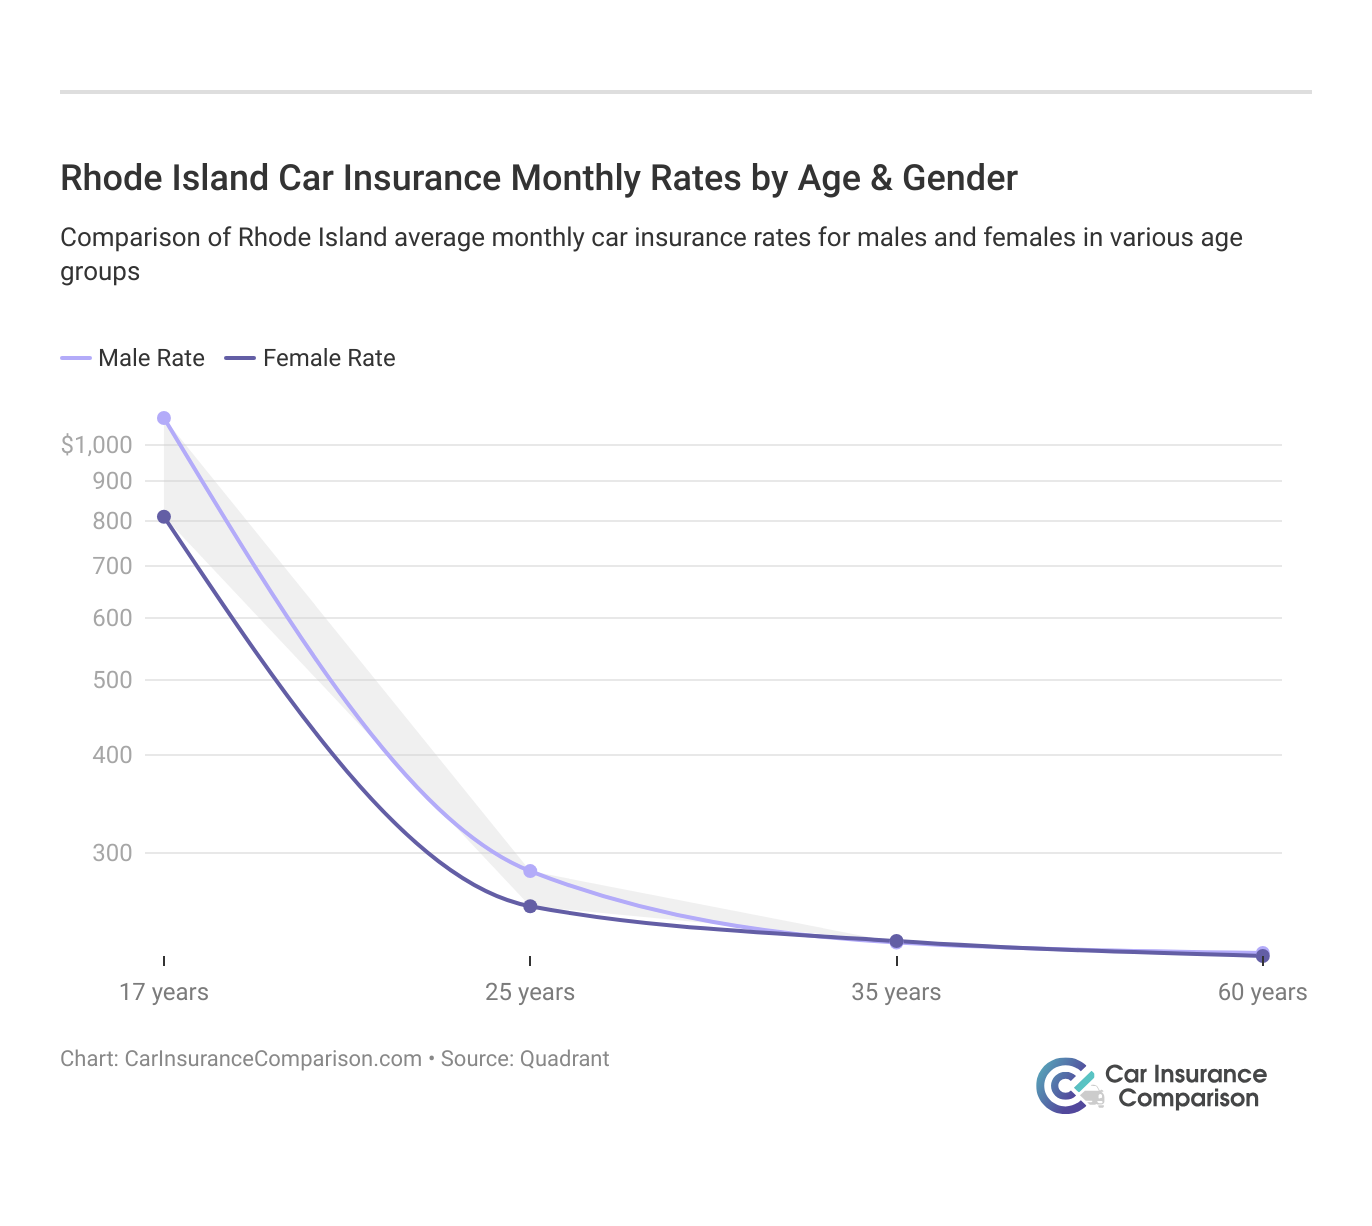 <h3>Rhode Island Car Insurance Monthly Rates by Age & Gender</h3>